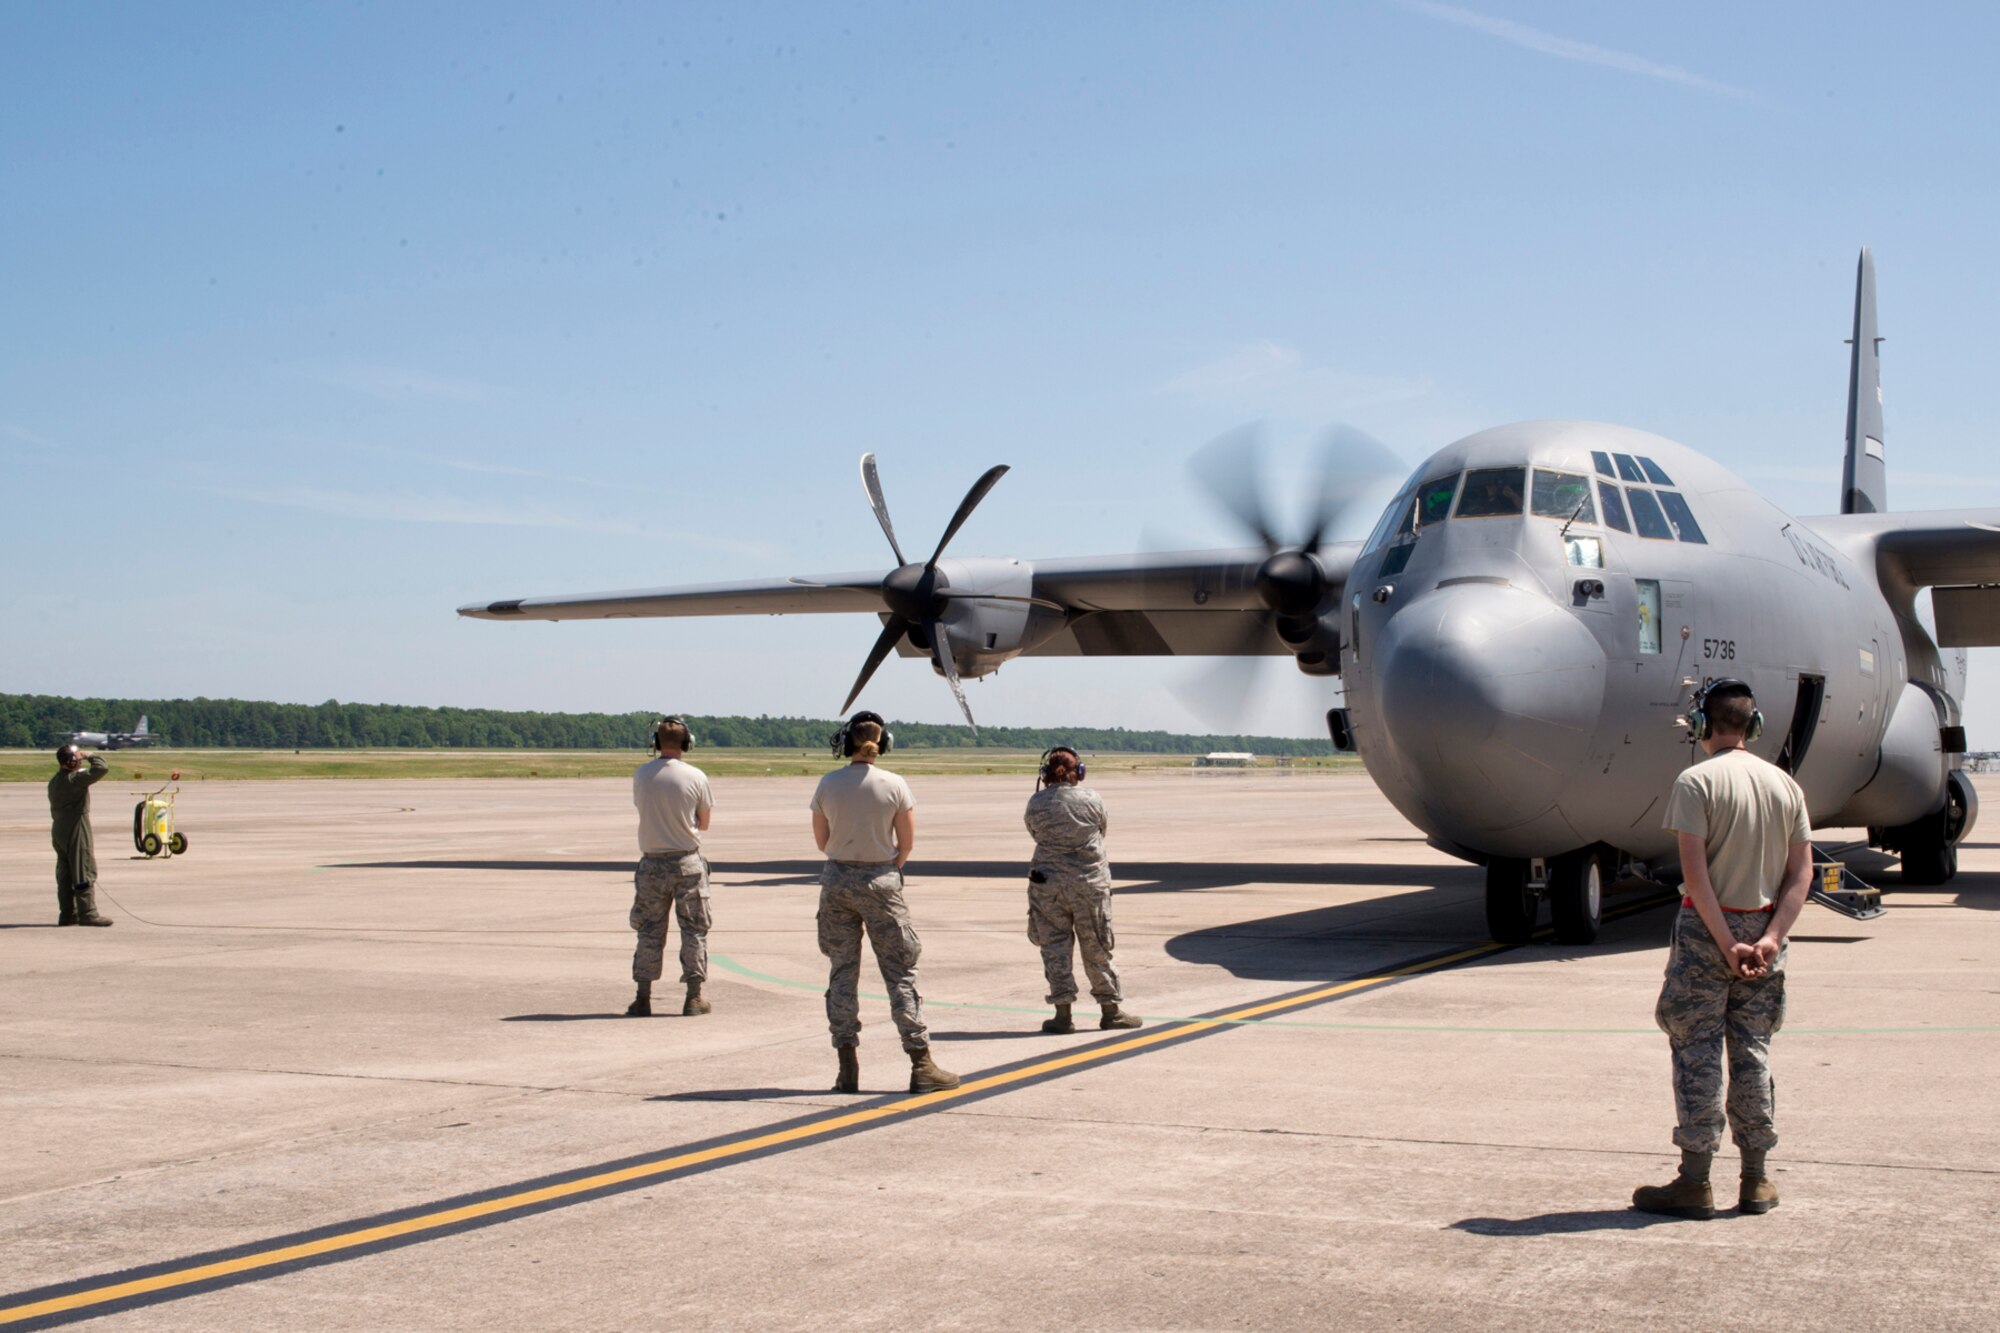 (Far Left) U.S. Air Force Reserve Tech. Sgt. Nick Crawford, loadmaster, 327th Airlift Squadron, looks for problems during the engine start of a C-130J at Little Rock Air Force Base, Ark., May 13, 2016. This marks the first flight of a C-130J aircraft manned by an all Reserve aircrew since the 913th Airlift Group’s transition from the “H” to the “J” model. (U.S. Air Force photo by Master Sgt. Jeff Walston/Released)